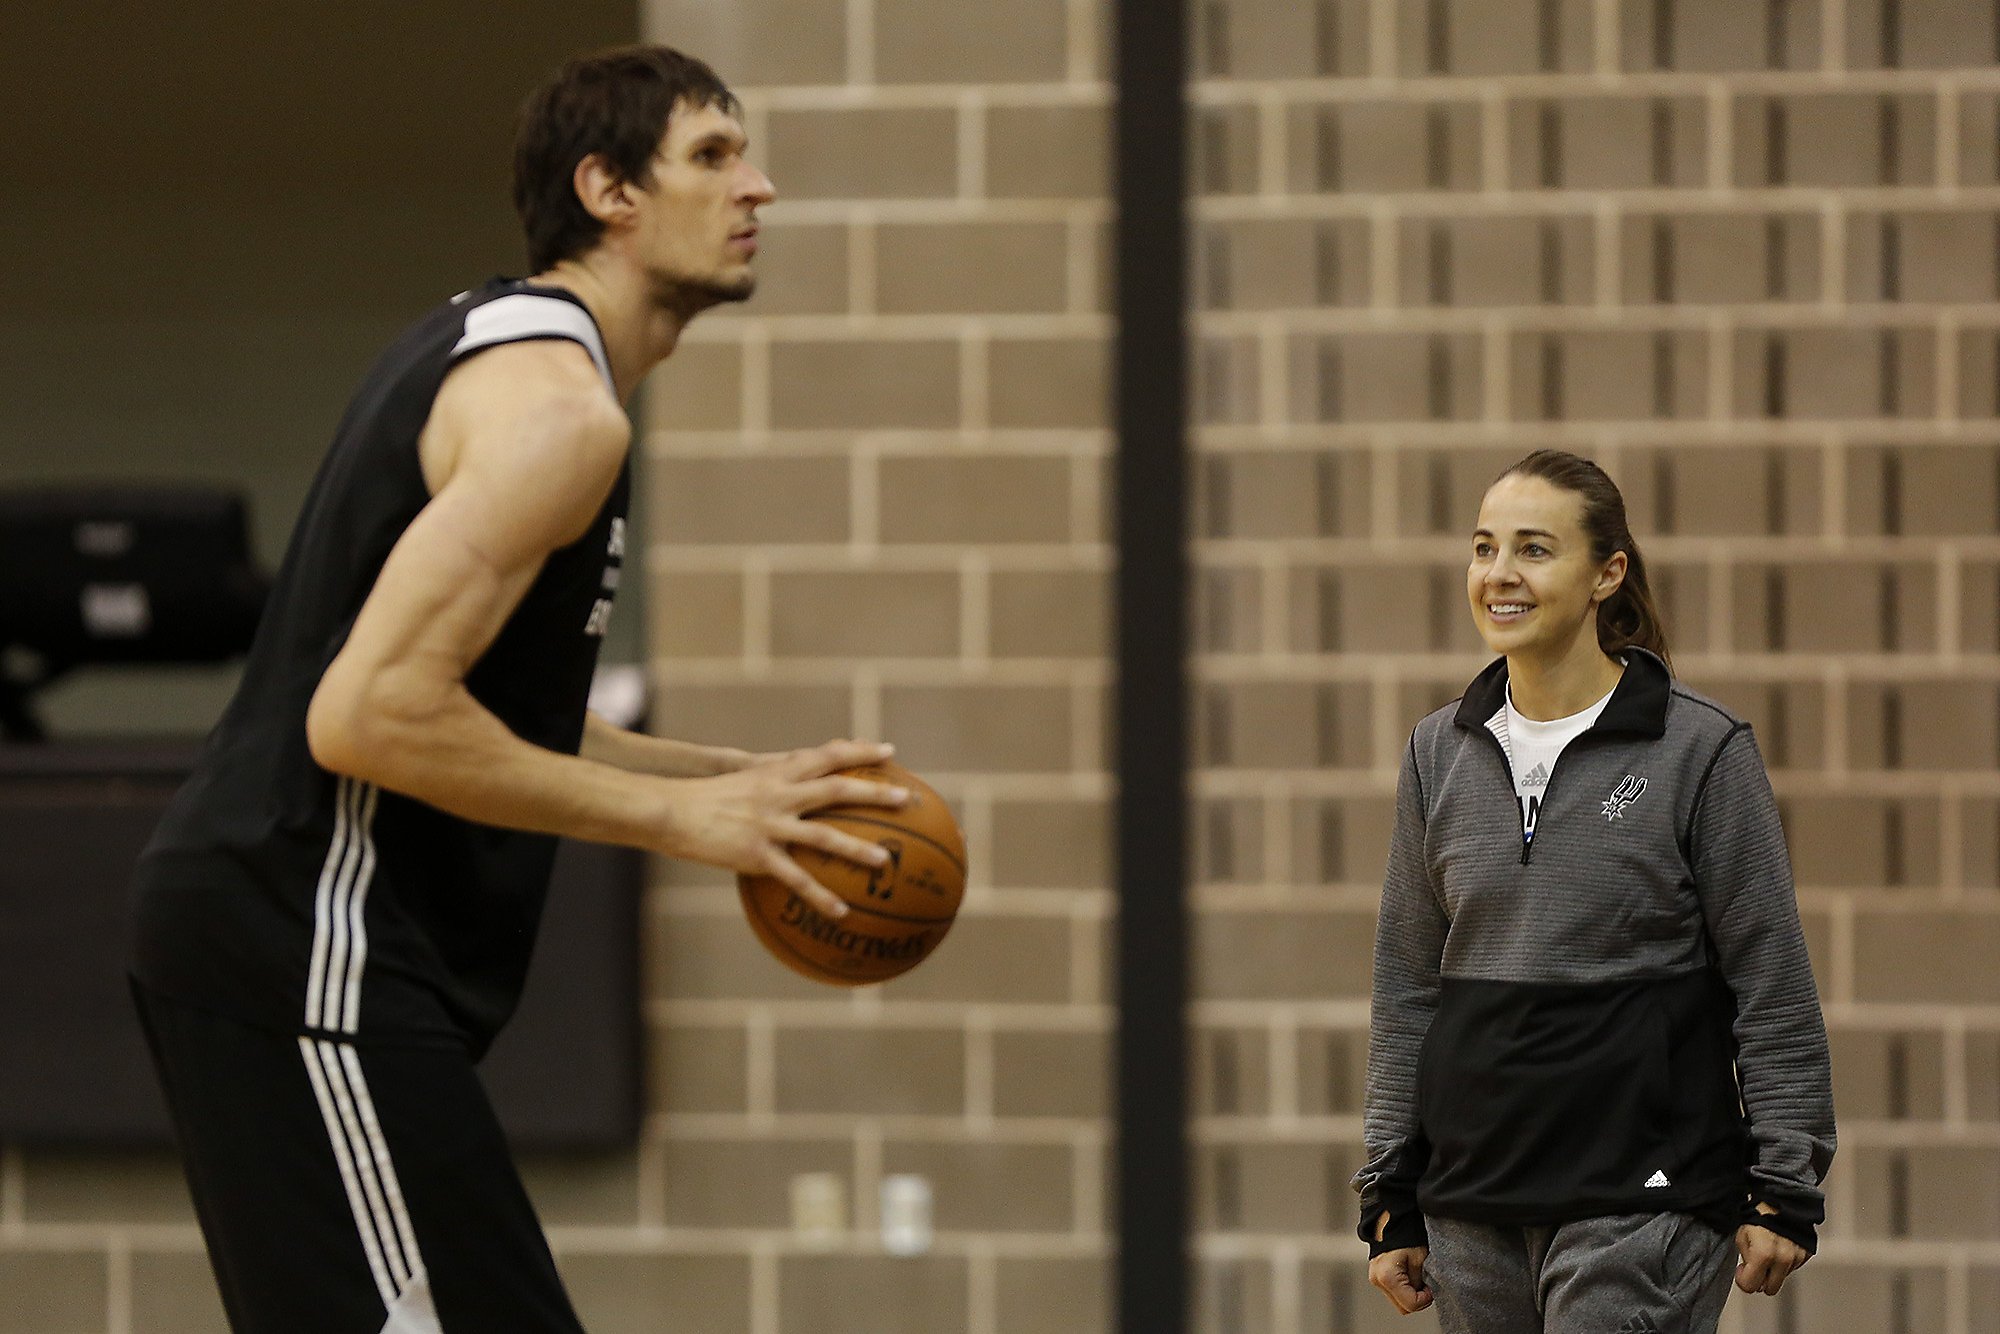 Spurs fan favorite Boban Marjanovic signs with Pistons